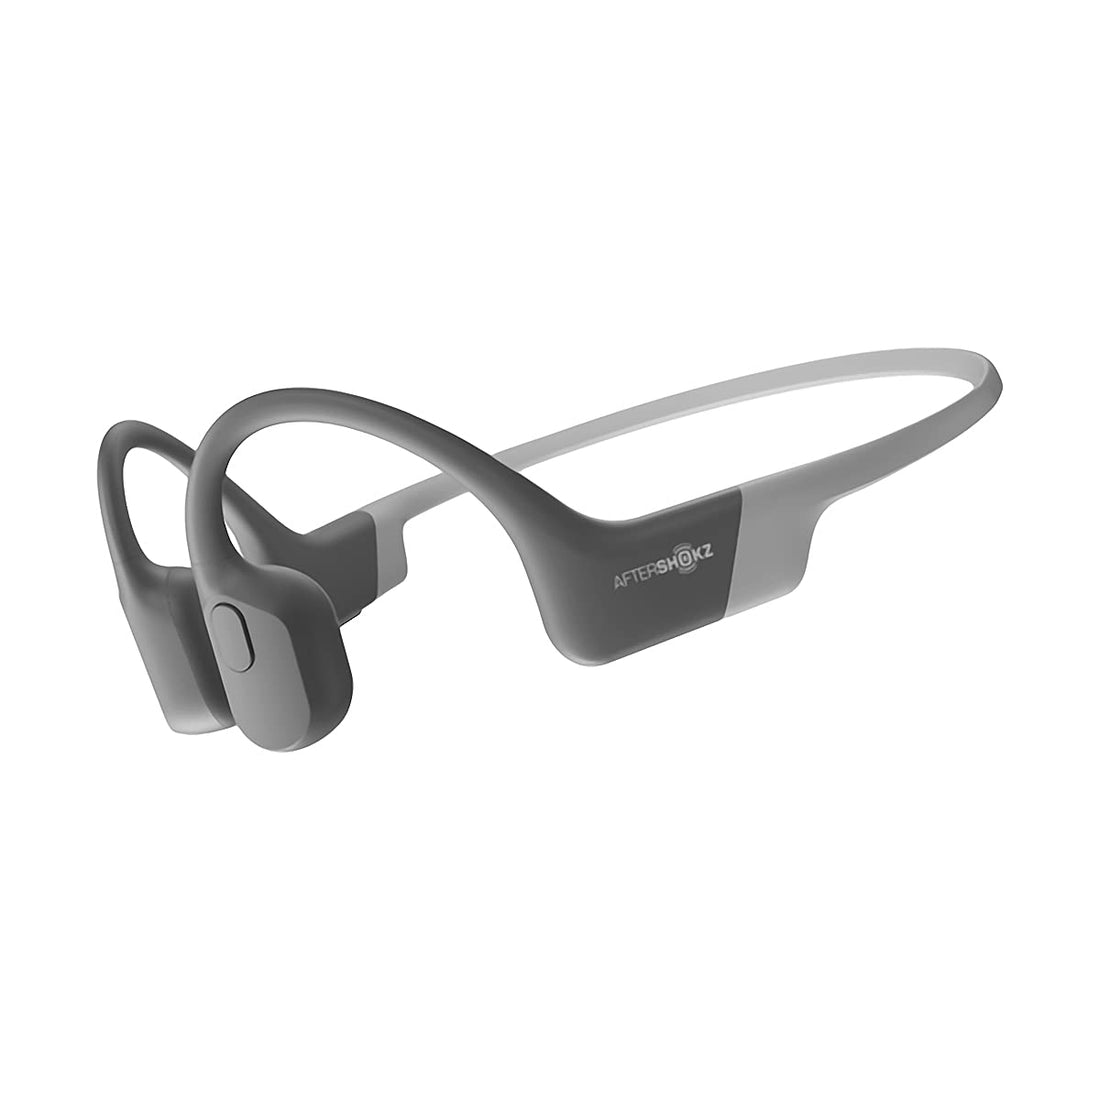 AfterShokz Aeropex Wireless Bluetooth Over The Ear Headphone with Mic (Lunar Grey)